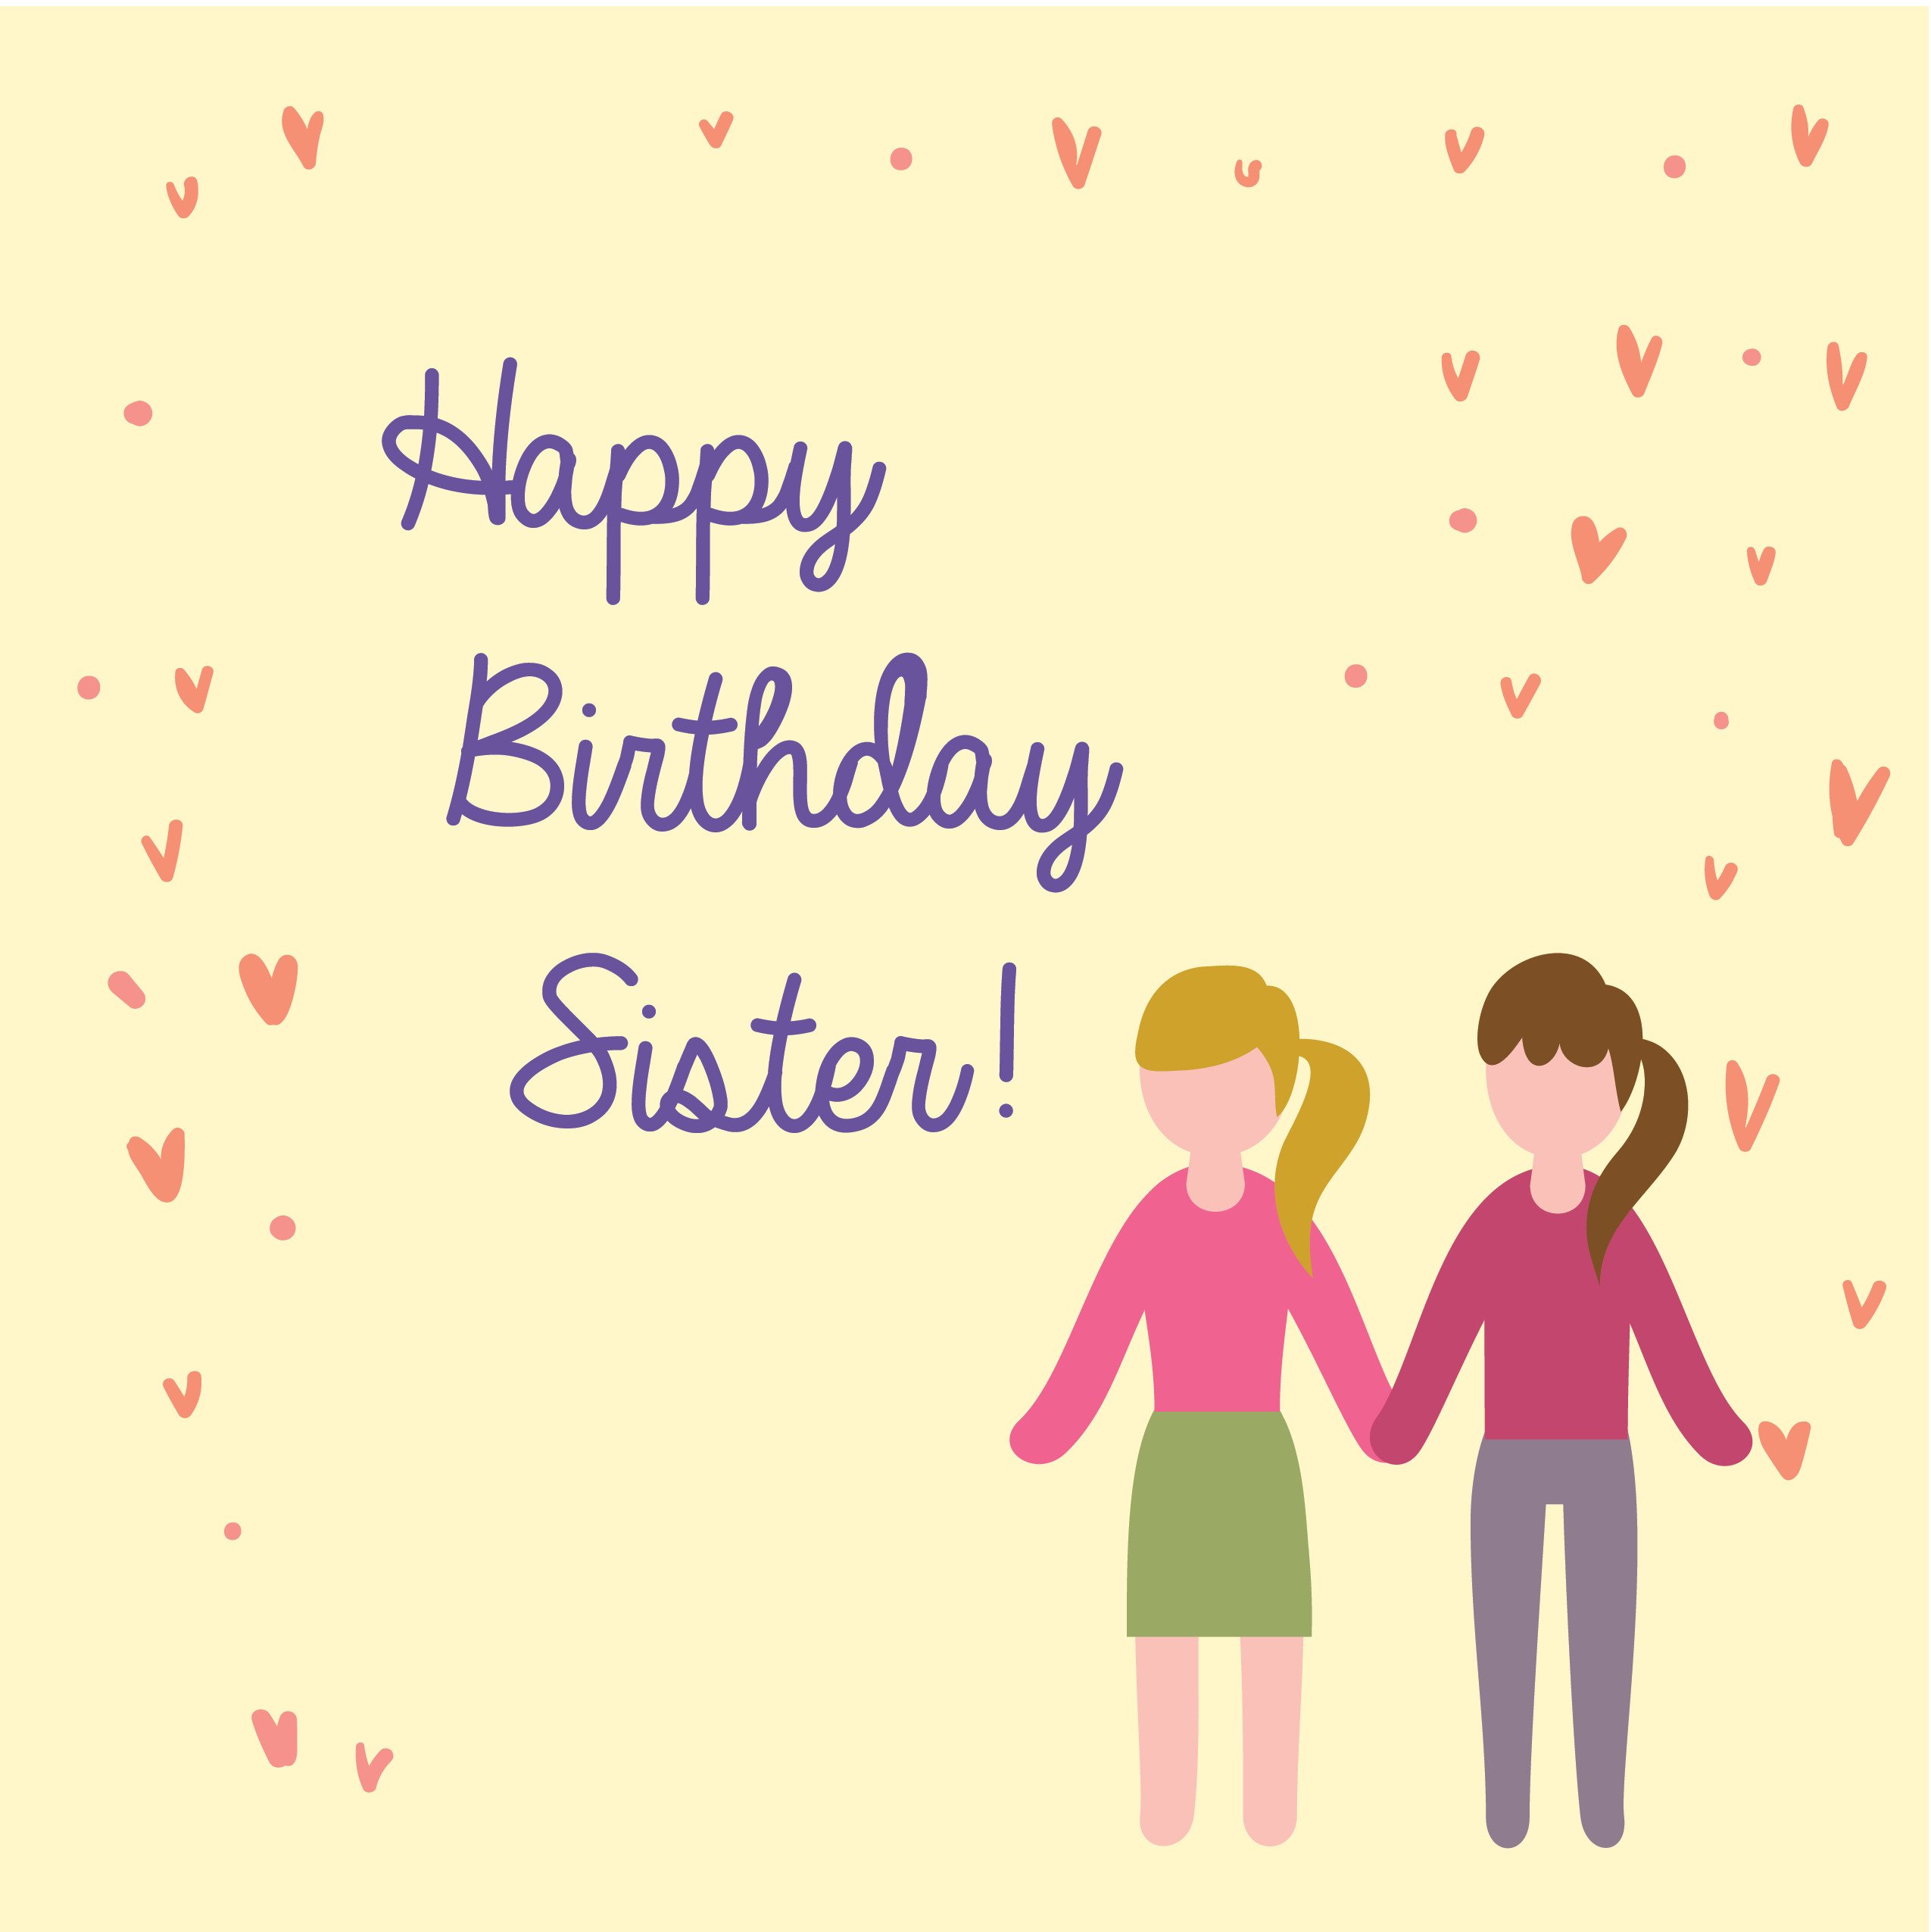 Funny Birthday Wishes For Younger Sister
 200 Happy Birthday Wishes & Quotes with Funny & Cute